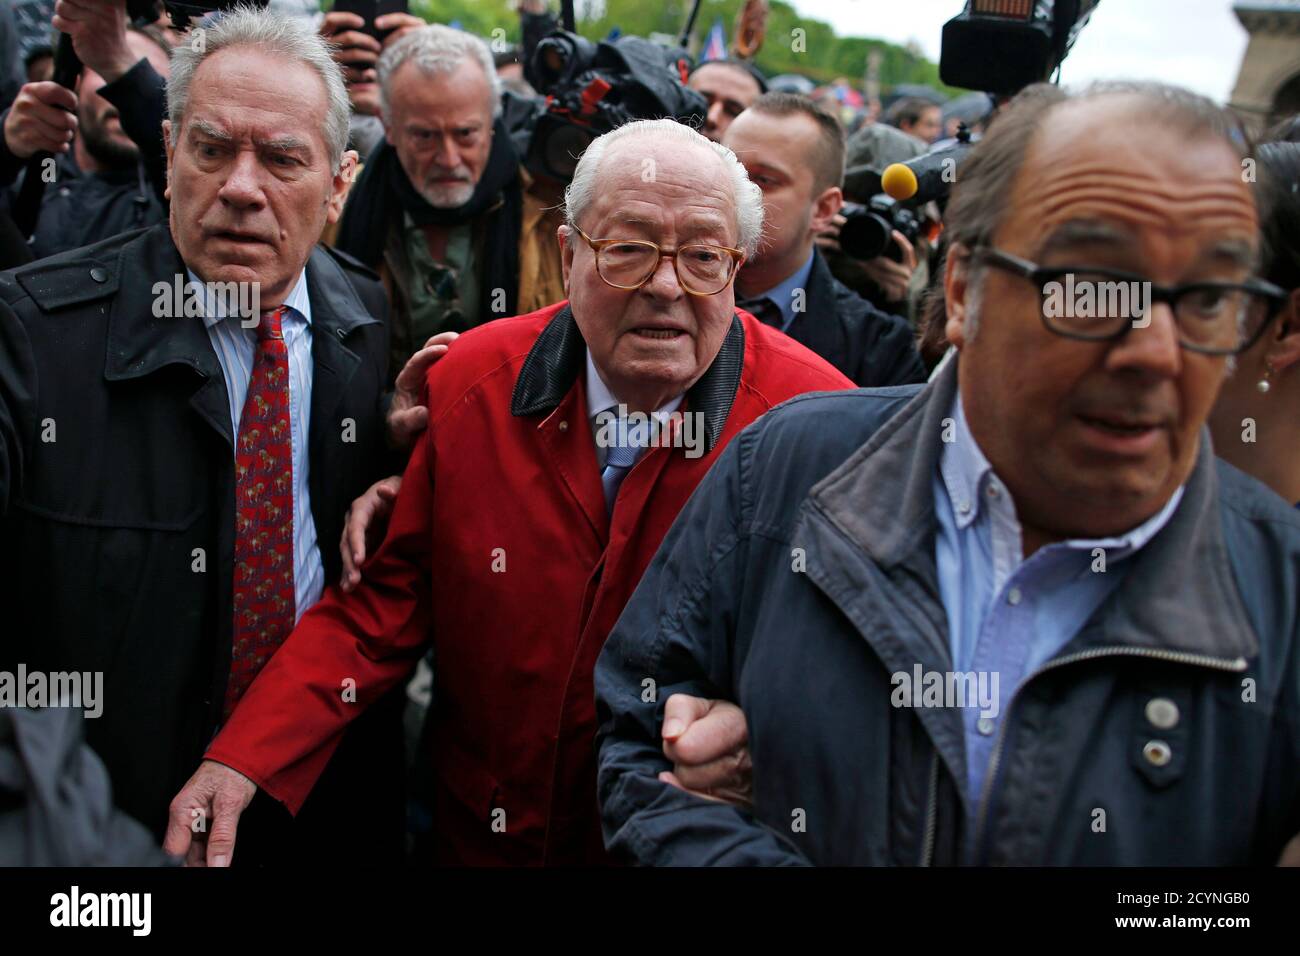 France's far-right National Front political party founder and honorary  president Jean-Marie Le Pen (C) and Jean-Michel Dubois (L) attend their  traditional May Day tribute to Joan of Arc in Paris, France, May